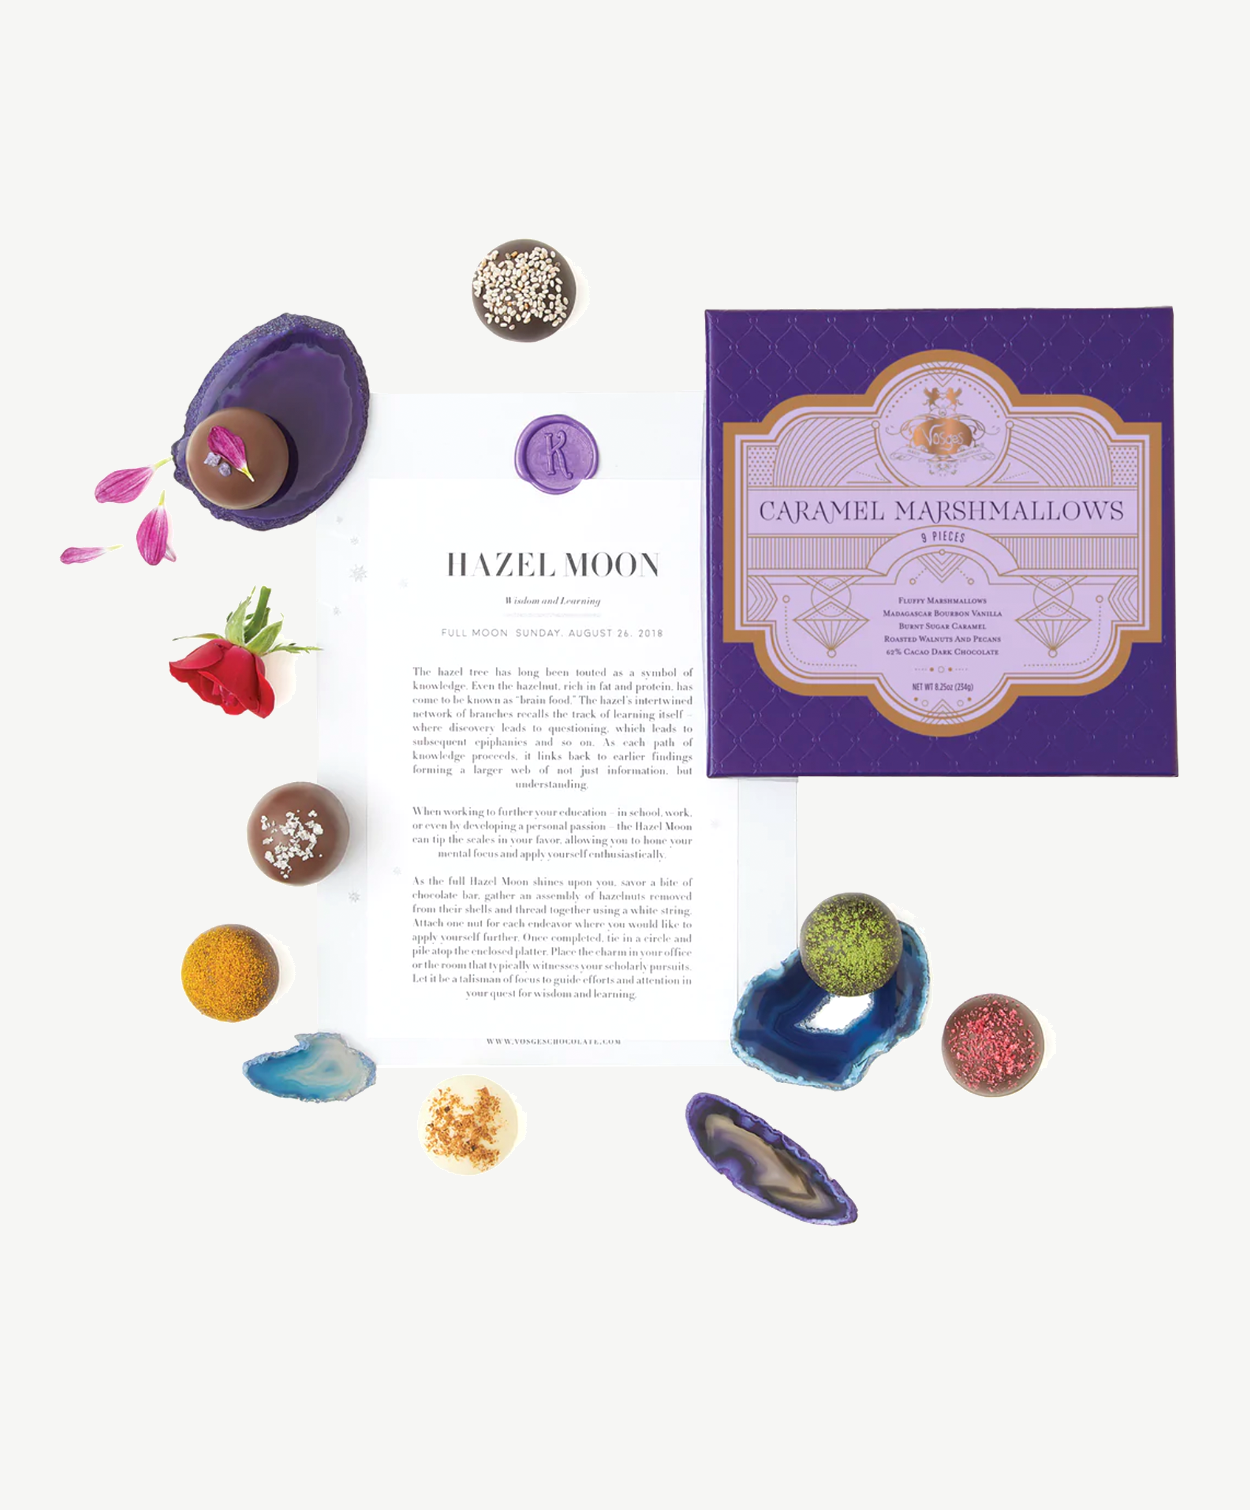 A box of Caramel Marshmallows sits beside several Vosges Chocolate Truffles and brightly colored geodes on a white background.  Central sits a piece of paper reading, "Hazel Moon."